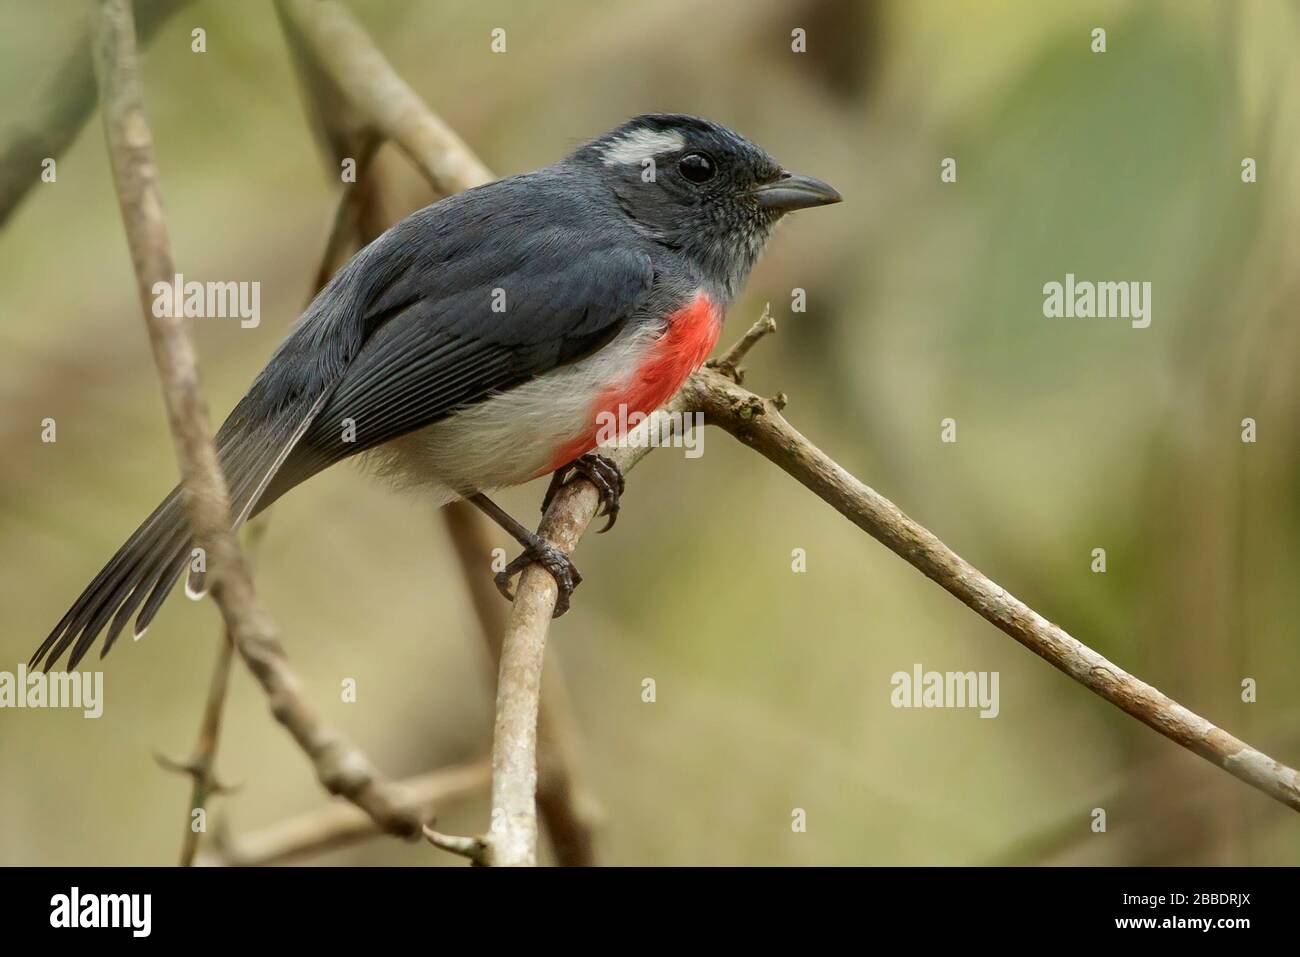 Gray-throated Chat, Granatellus sallaei, perched on a branch in Guatemala in Central America. Stock Photo